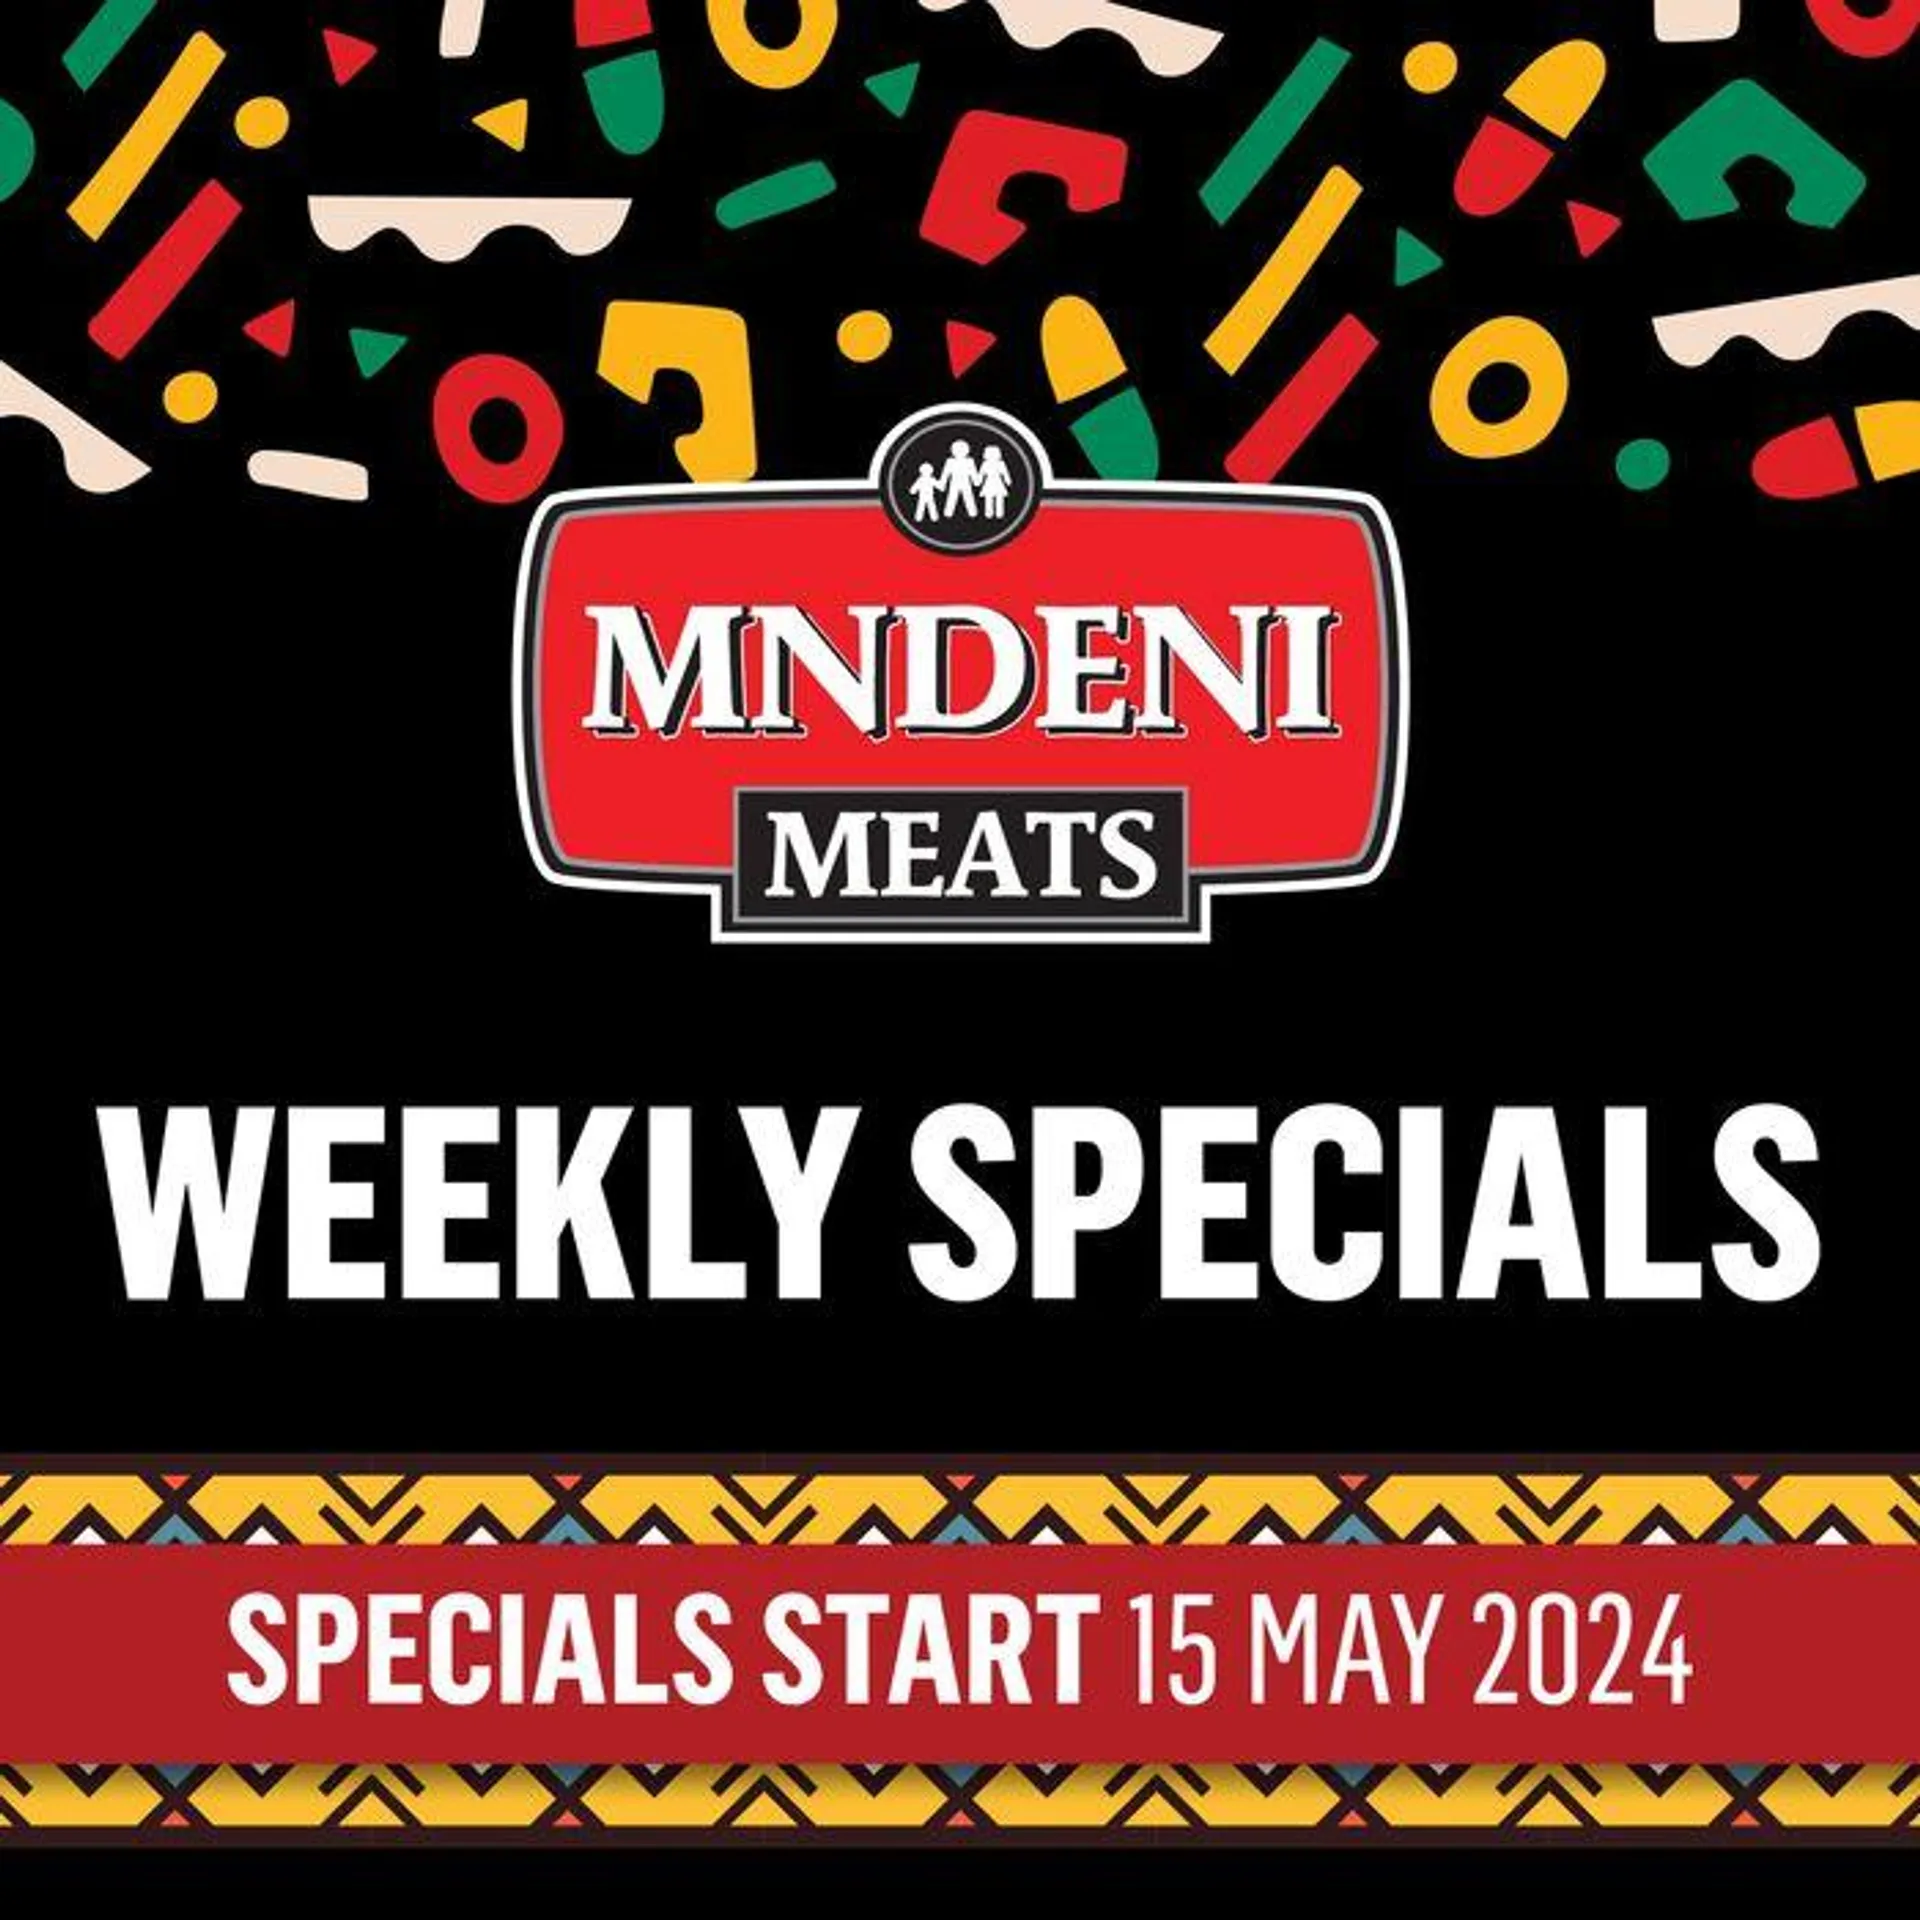 Bluff Meat Supply Mndeni Meats - 1